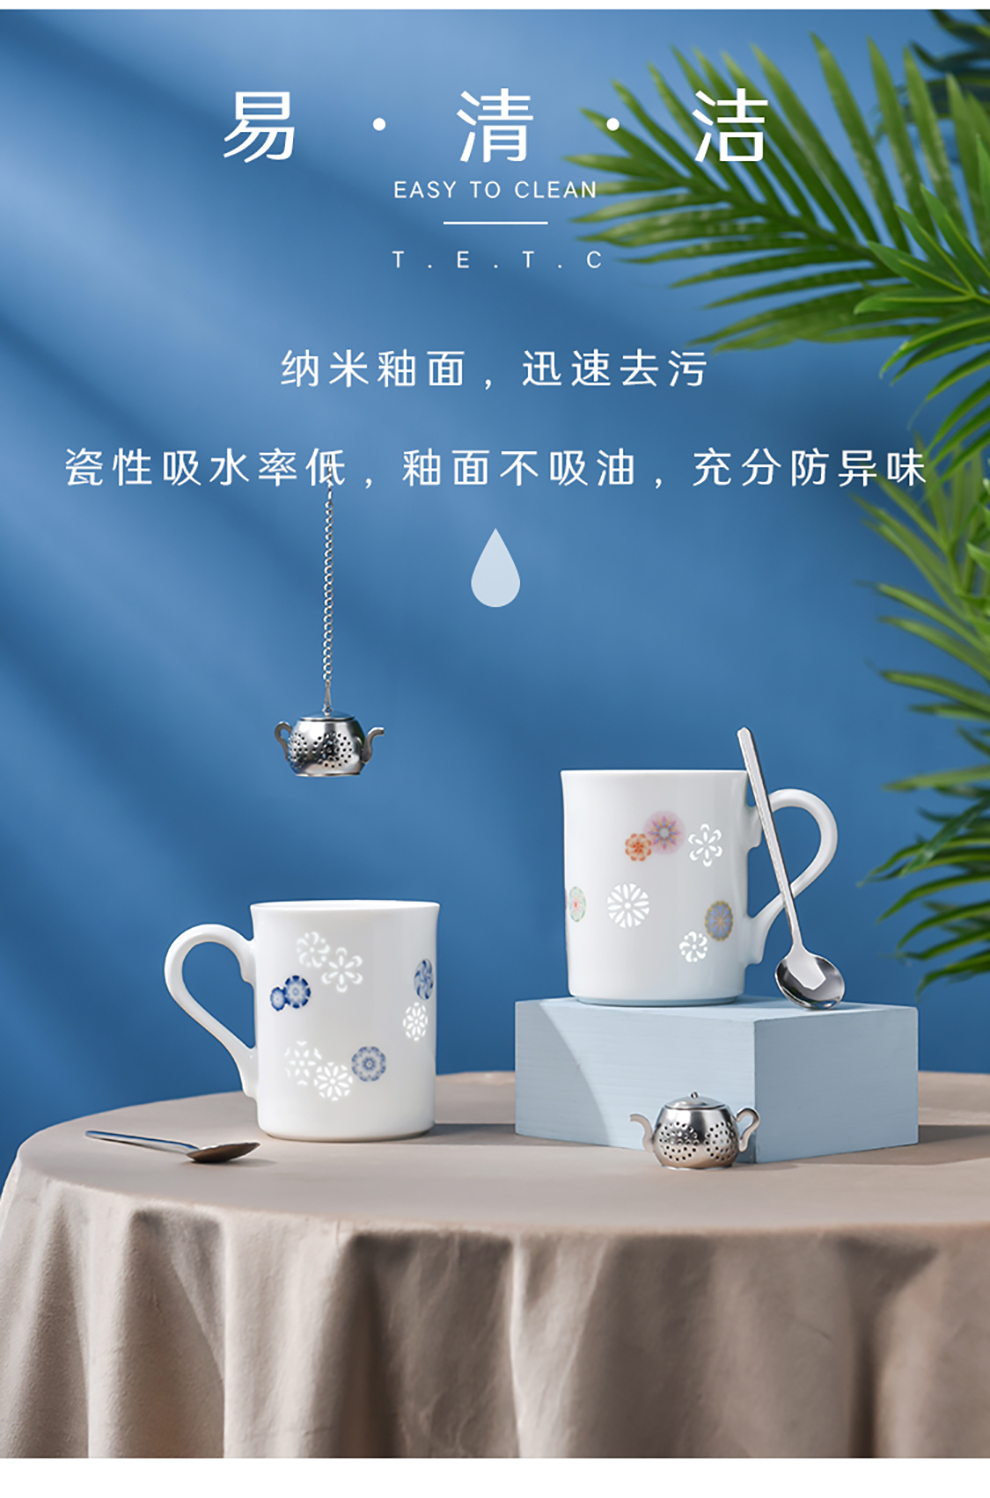 Jingdezhen ceramic porcelain enamel ball flower mugs household gifts creative office cup cup coffee cup